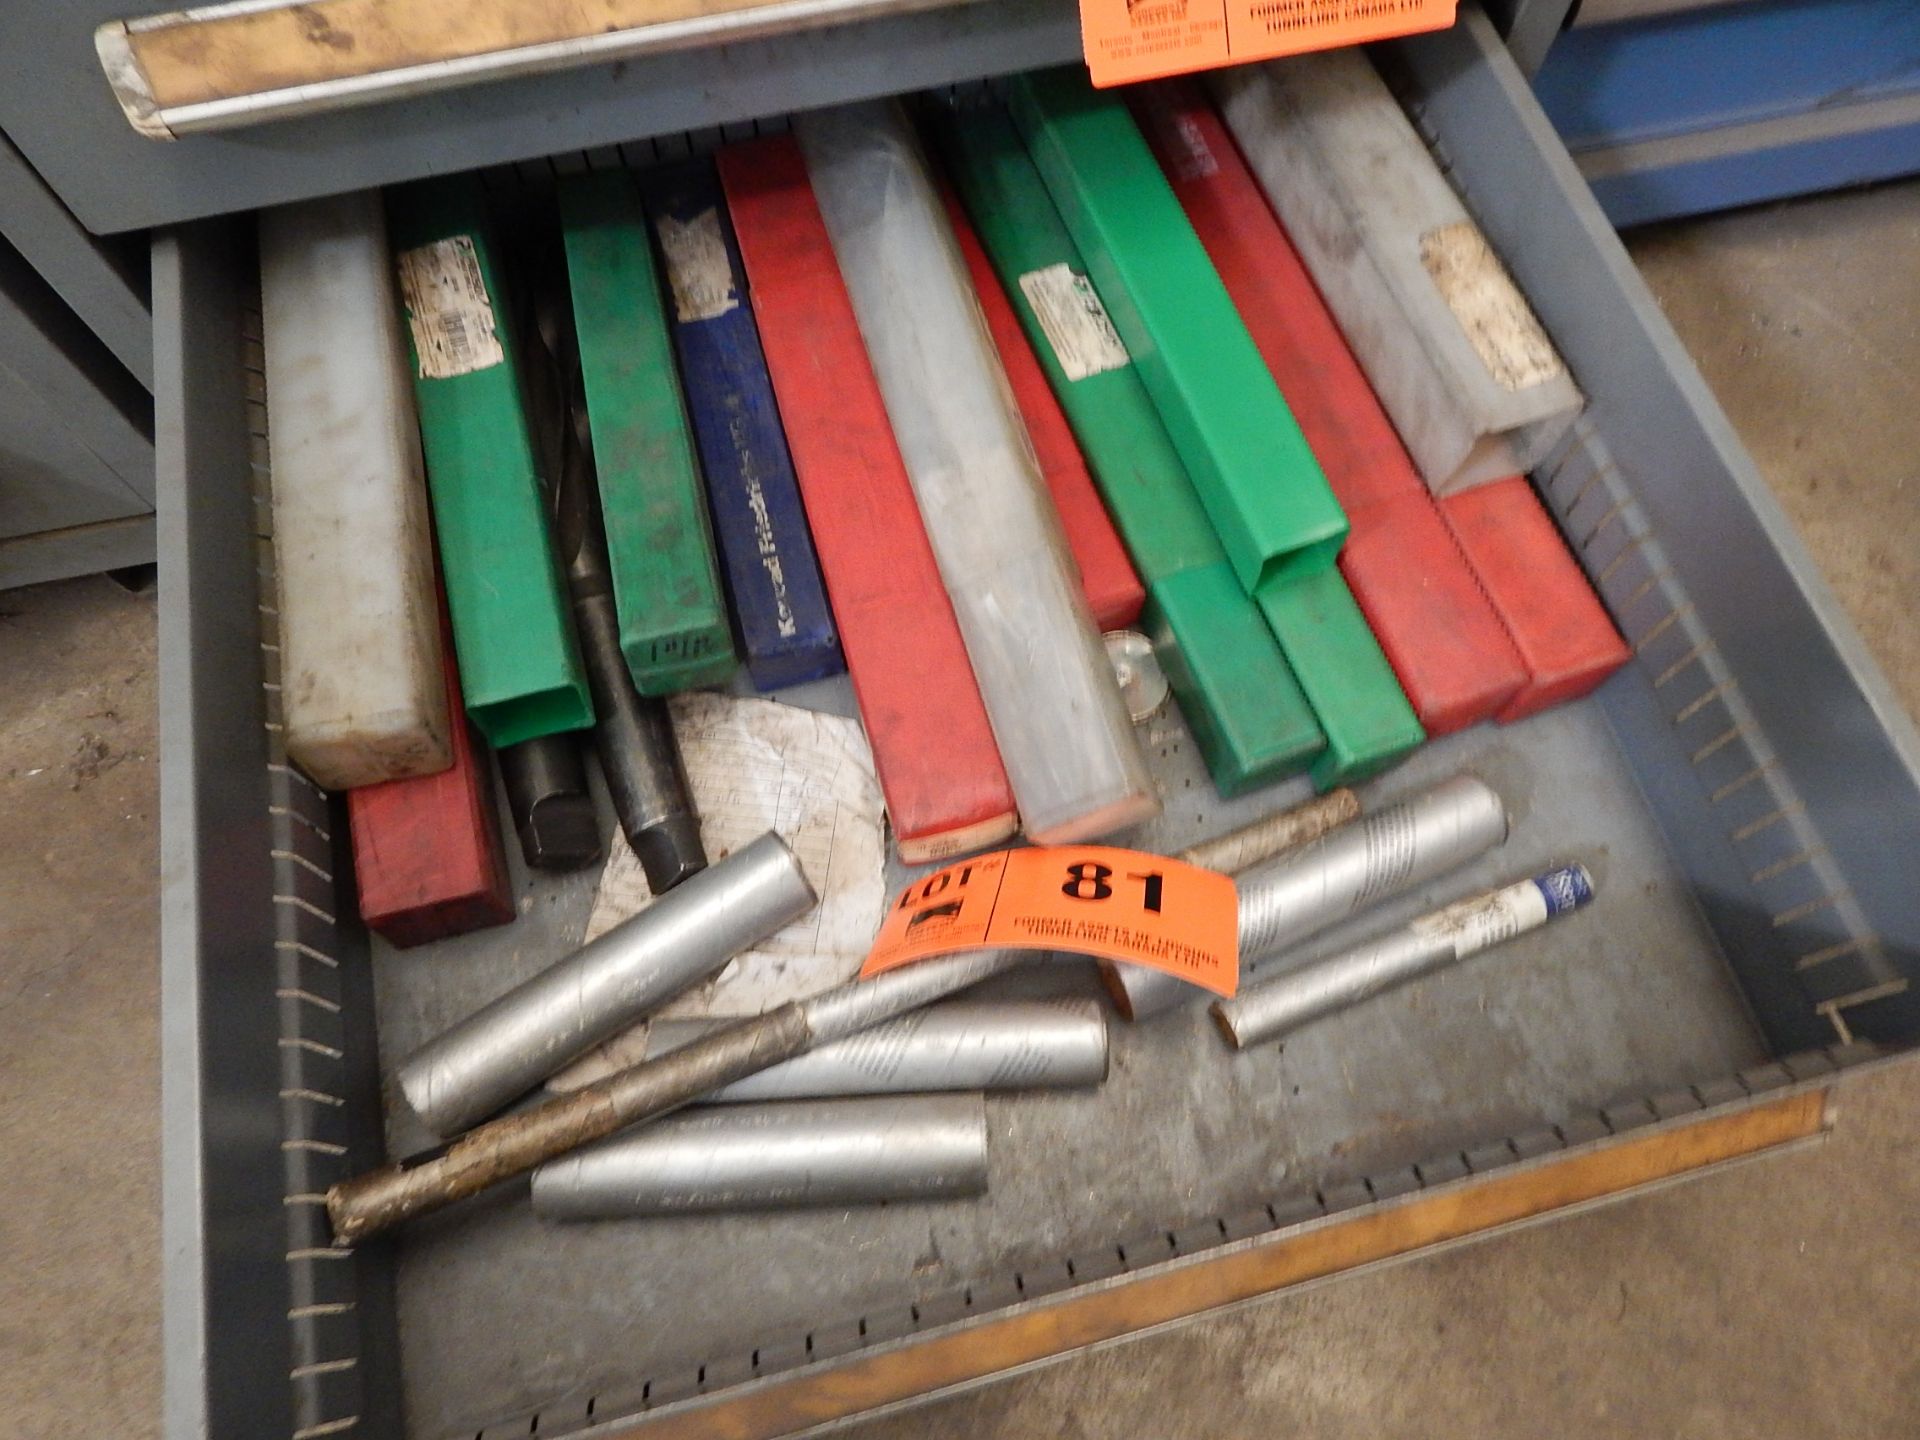 LOT/ CONTENTS OF DRAWER CONSISTING OF DRILLS